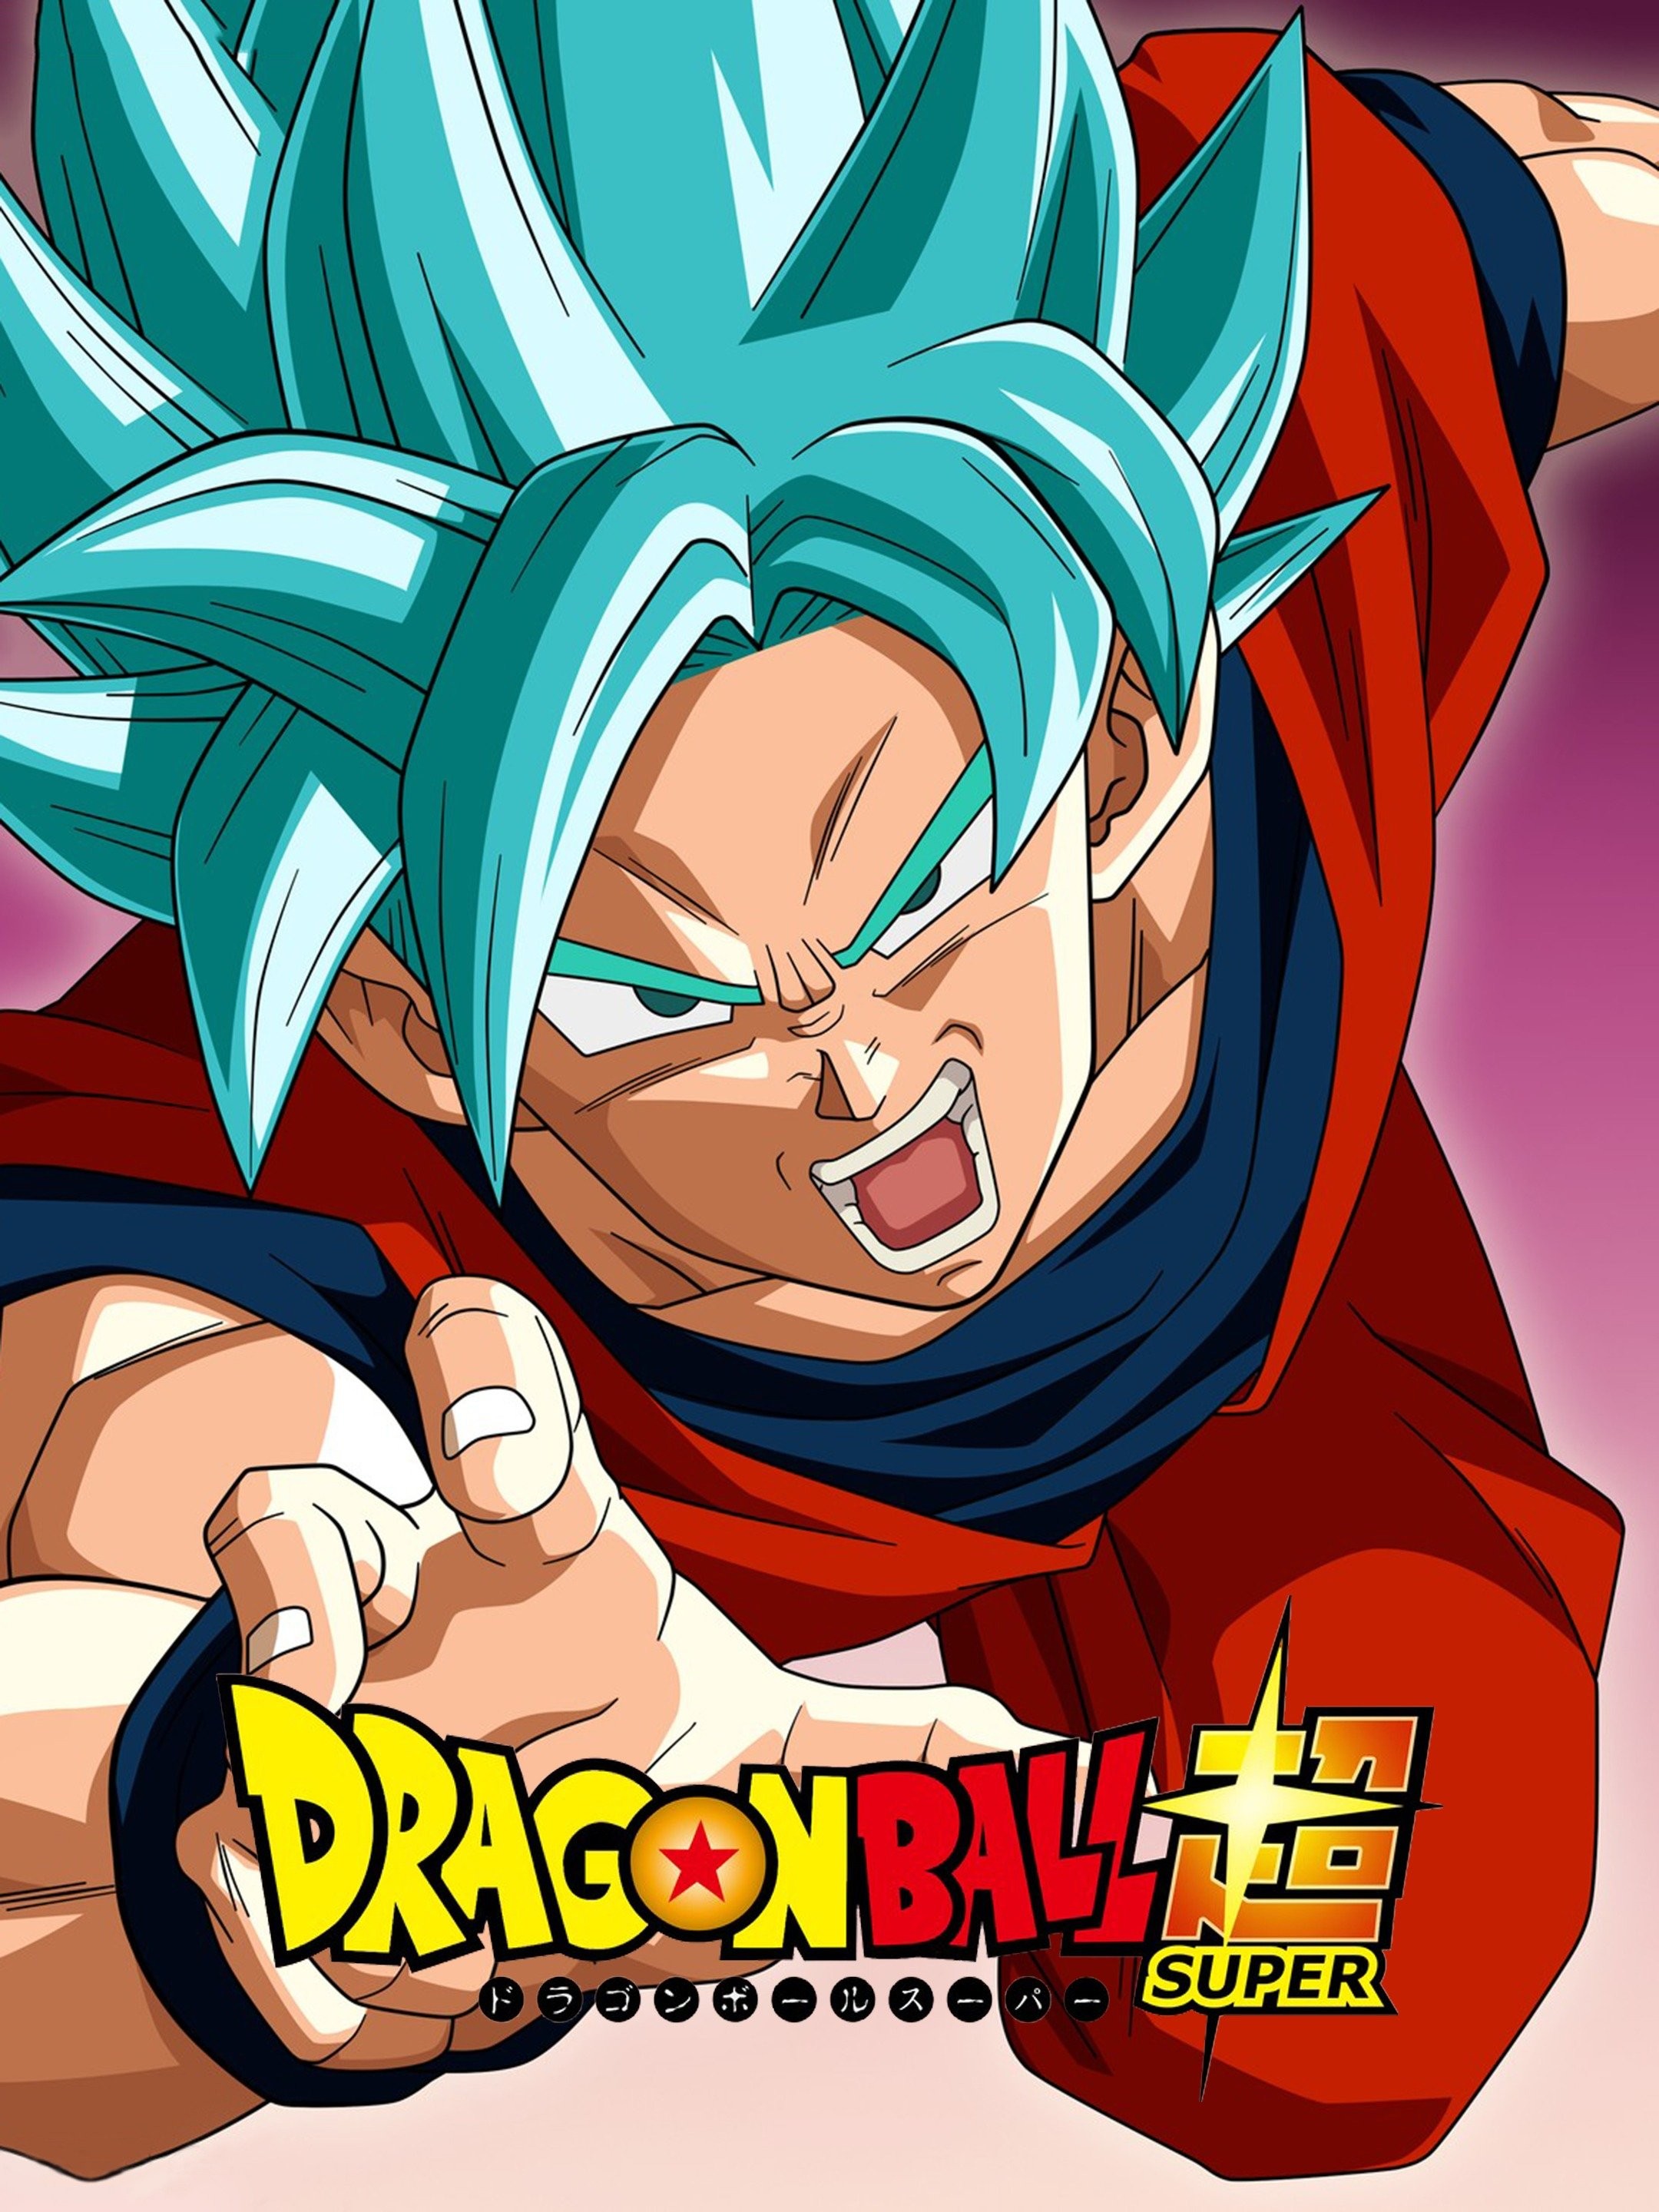 Dragon Ball Super: 15 Biggest Differences Between The Manga And The Anime